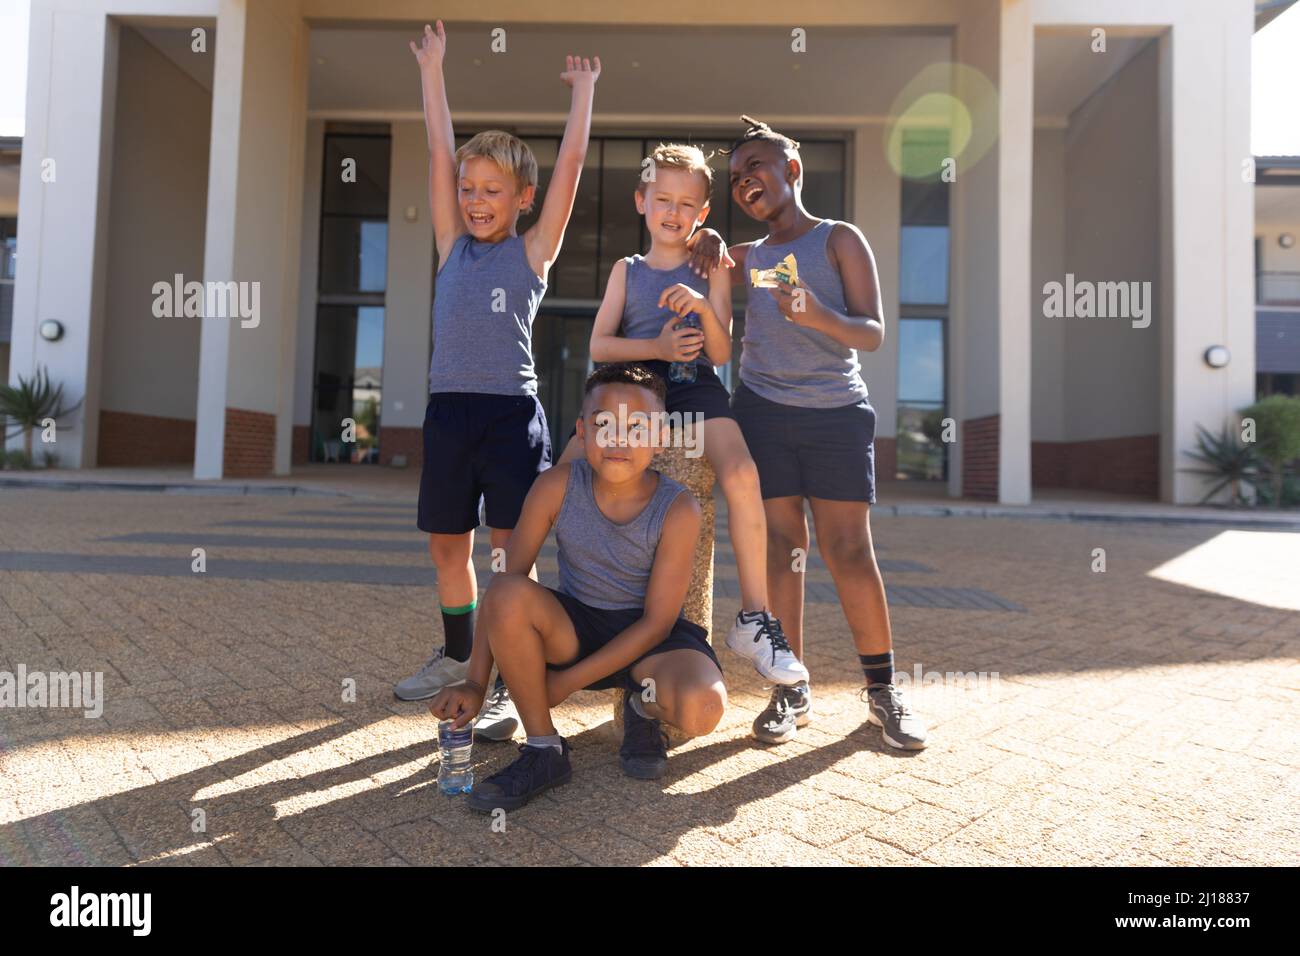 Cheerful elementary schoolboys against school building during sunny day Stock Photo